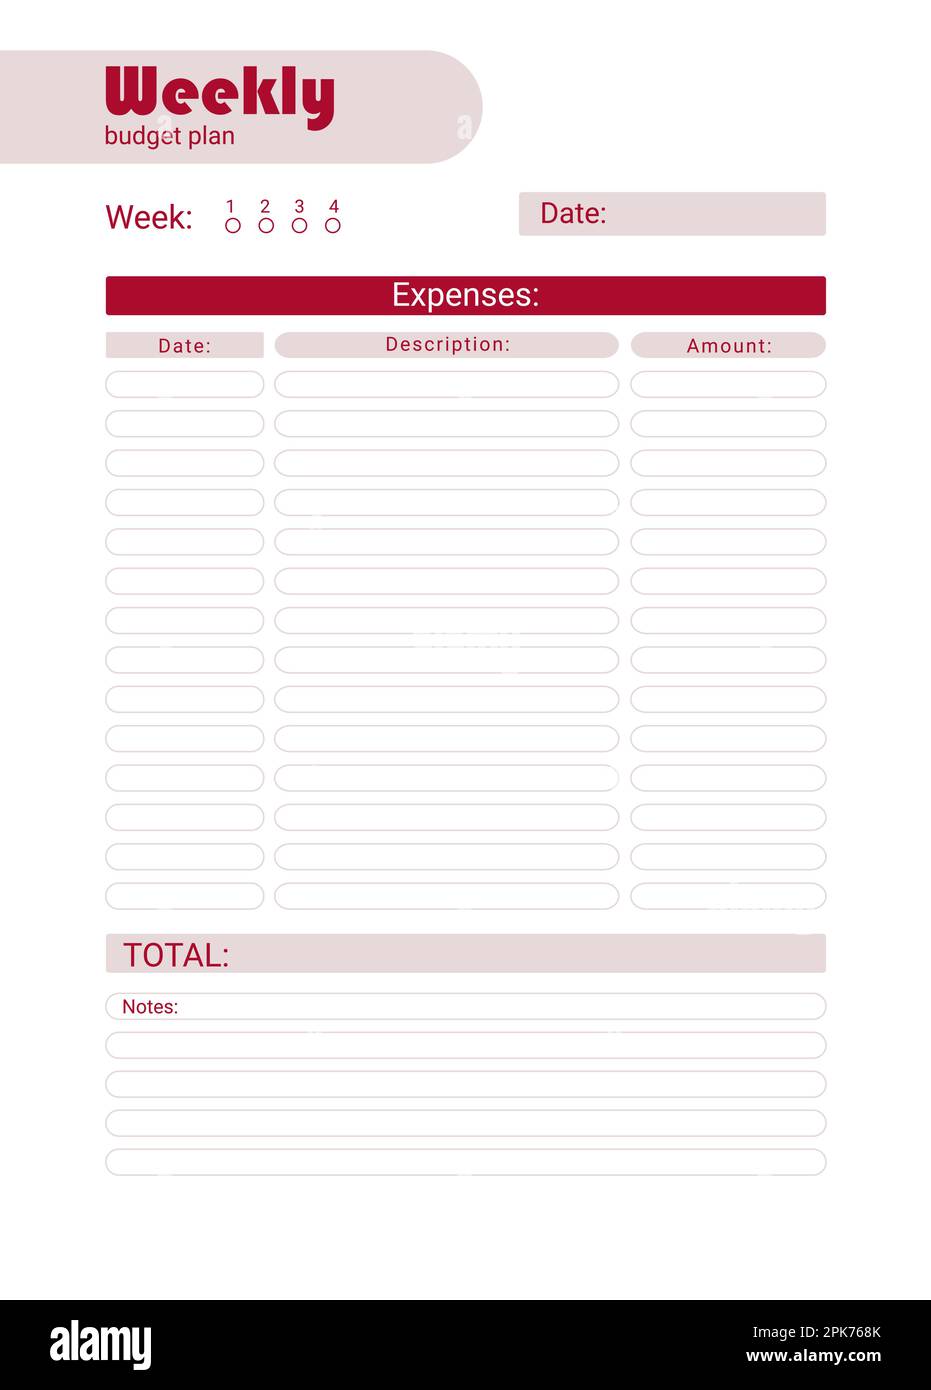 Budget planner page design template with Dandelion print. Monthly